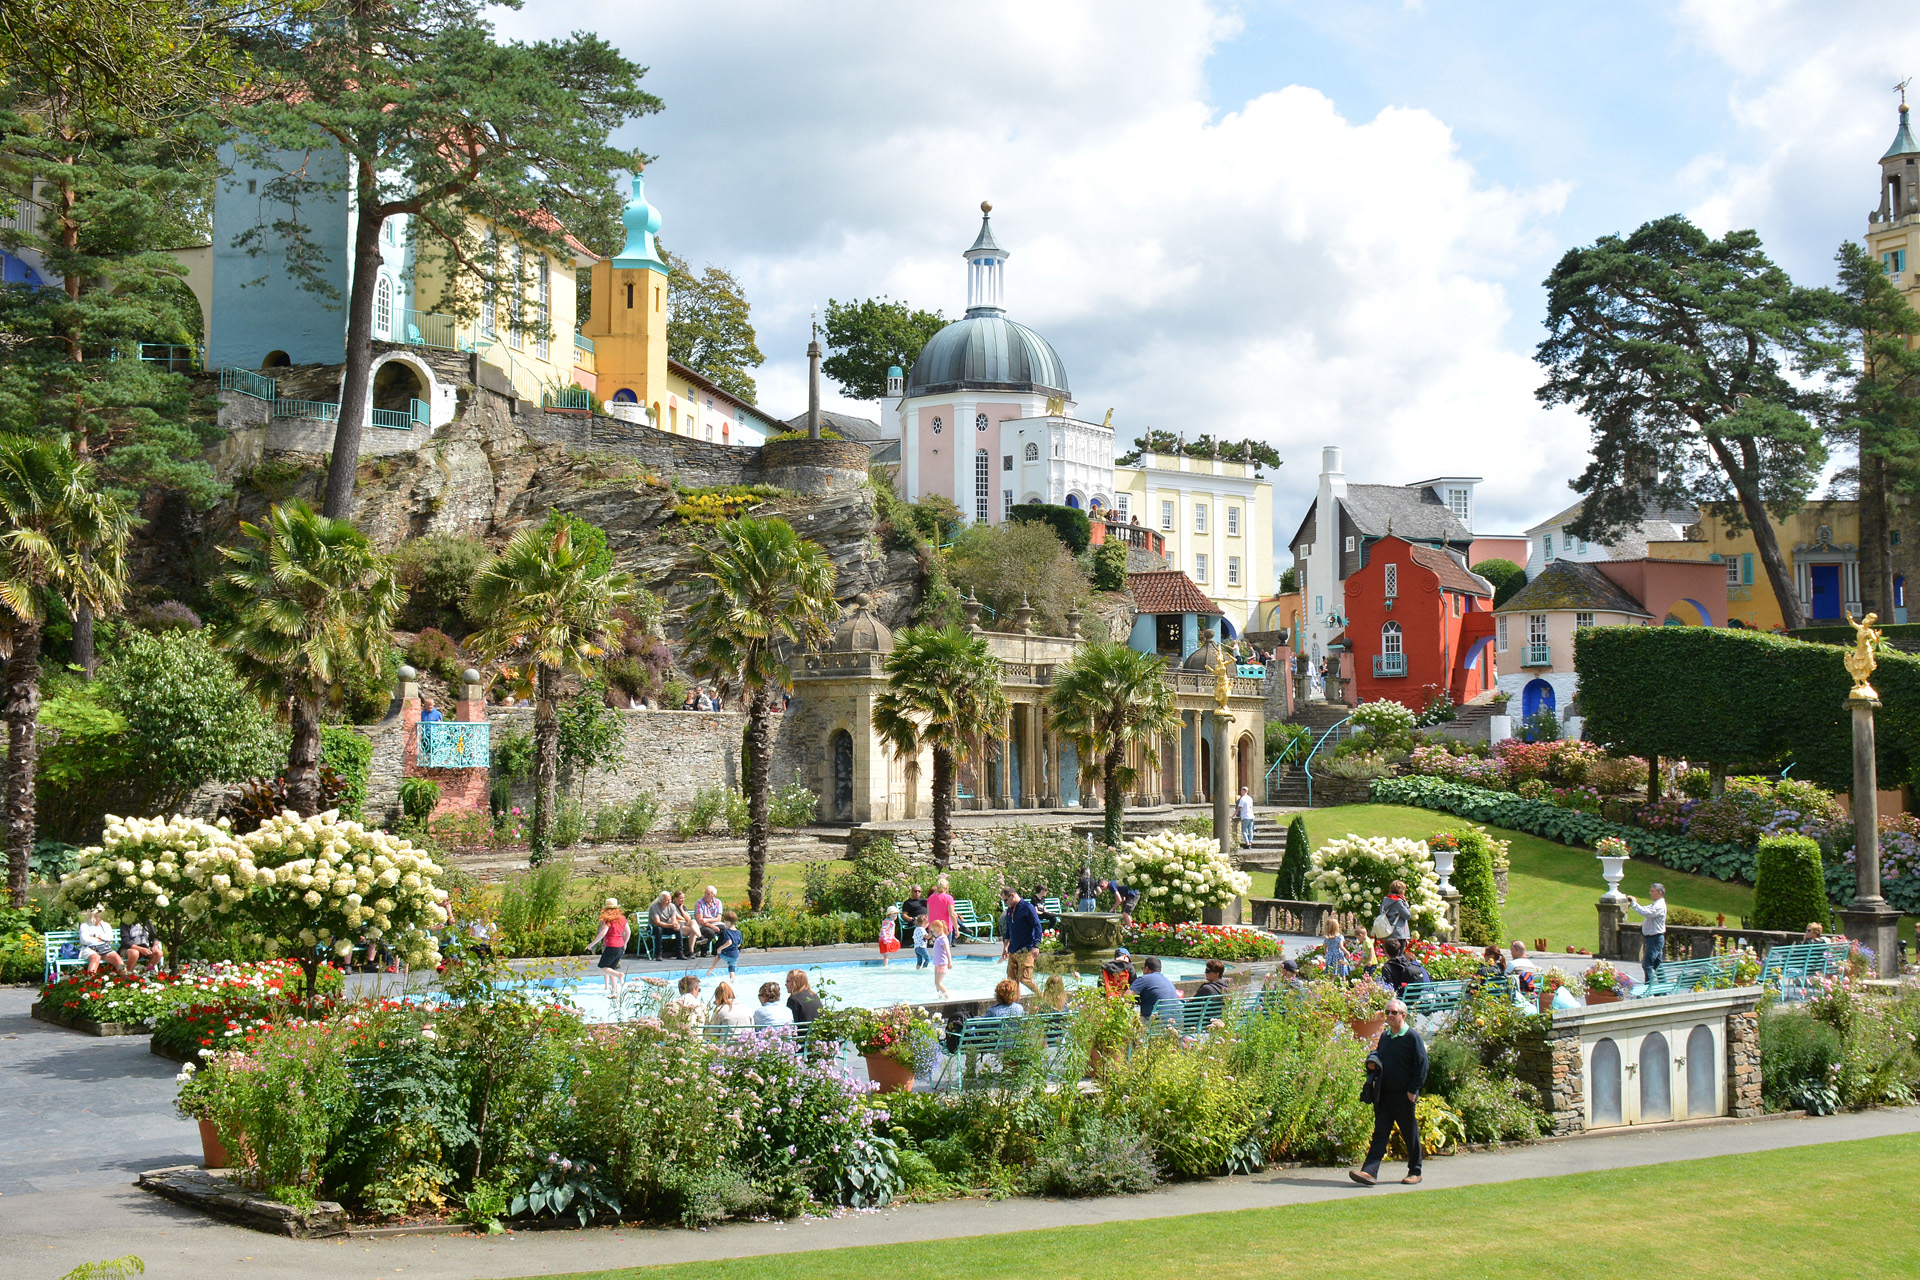 Portmeirion, a beautiful town in Wales